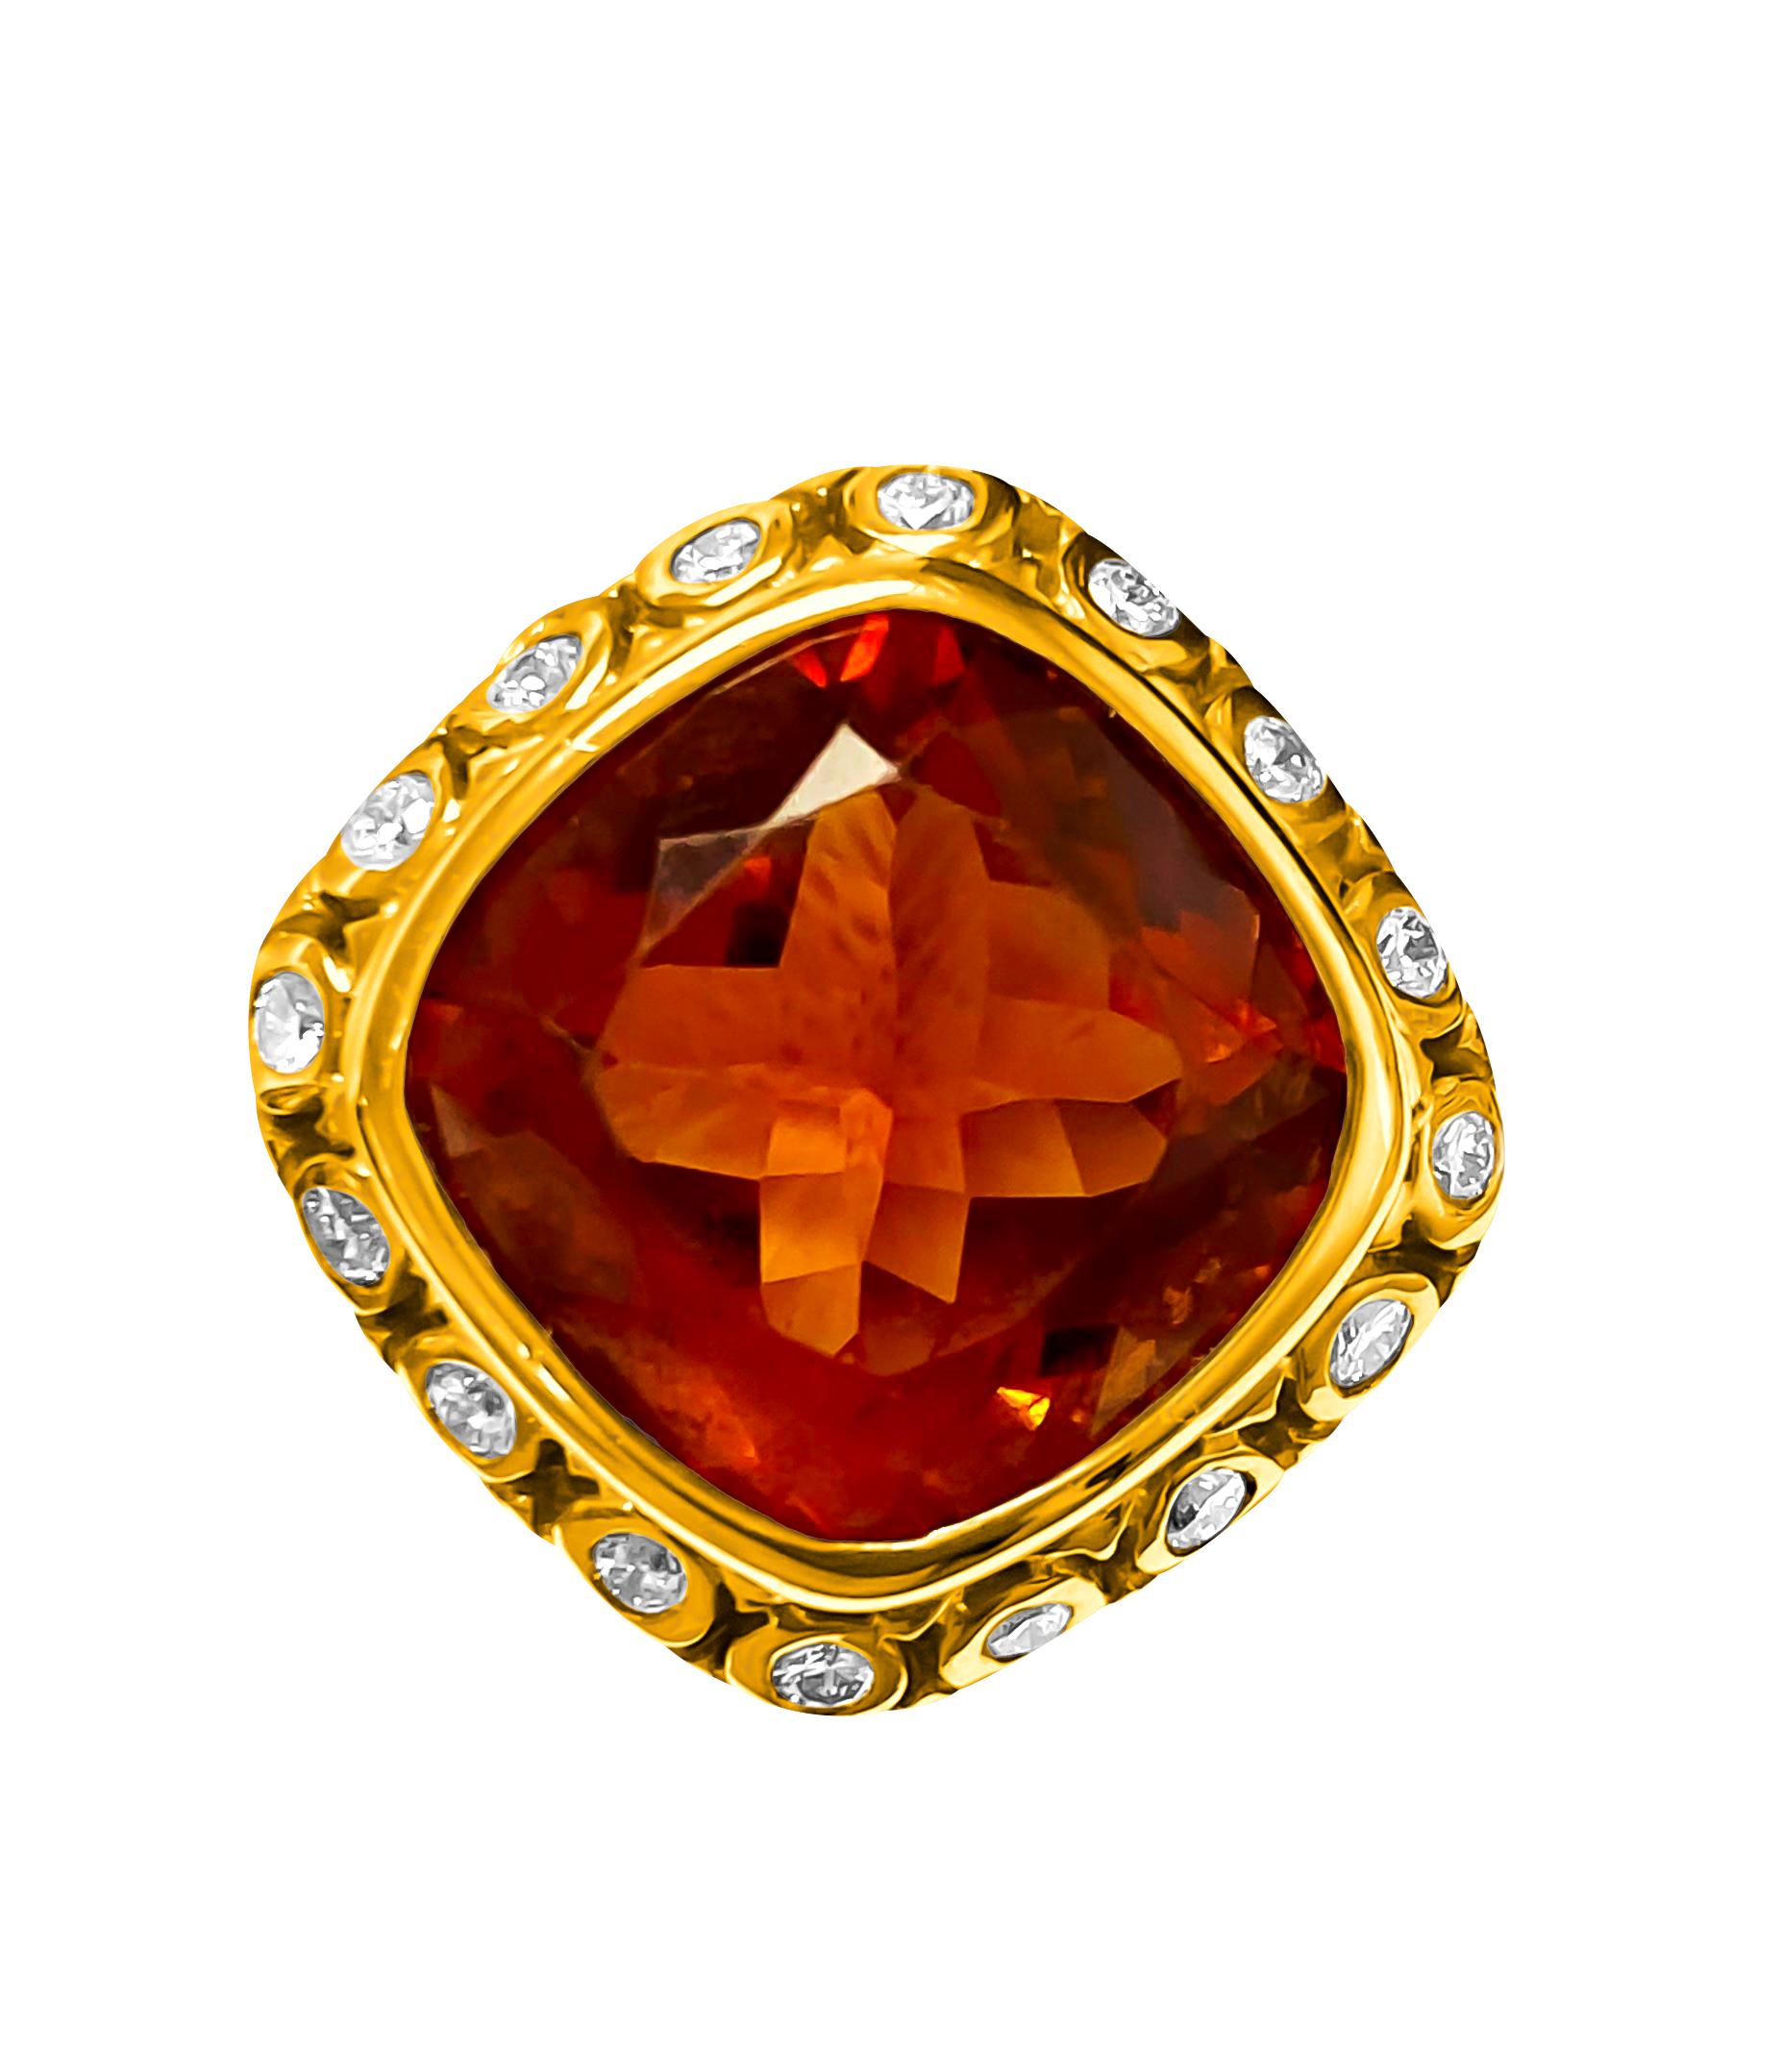 Metal: 18k Yellow gold. 

Center: 13.50 carat citrine. Cushion cut. 100% natural earth mined. Deep orange-brown color. 

Side: 1.10 carat diamonds. Round brilliant cut. VS clarity and F-G color. 

Total weight of the ring: 12.40 grams. 

All stones